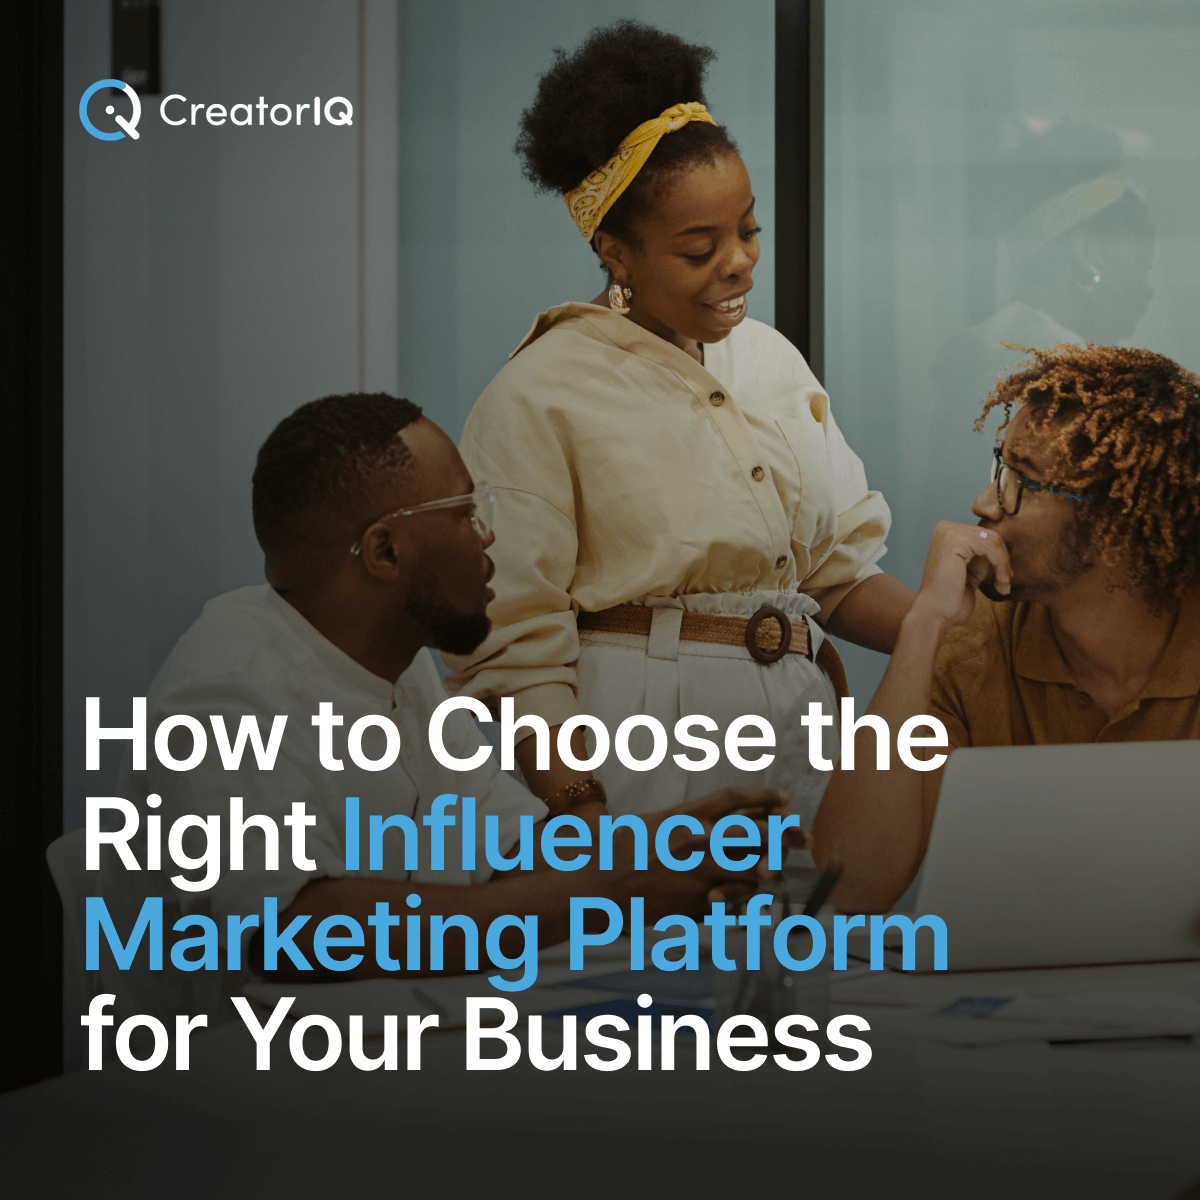 How to Choose the Right Influencer Marketing Platform for Your Business